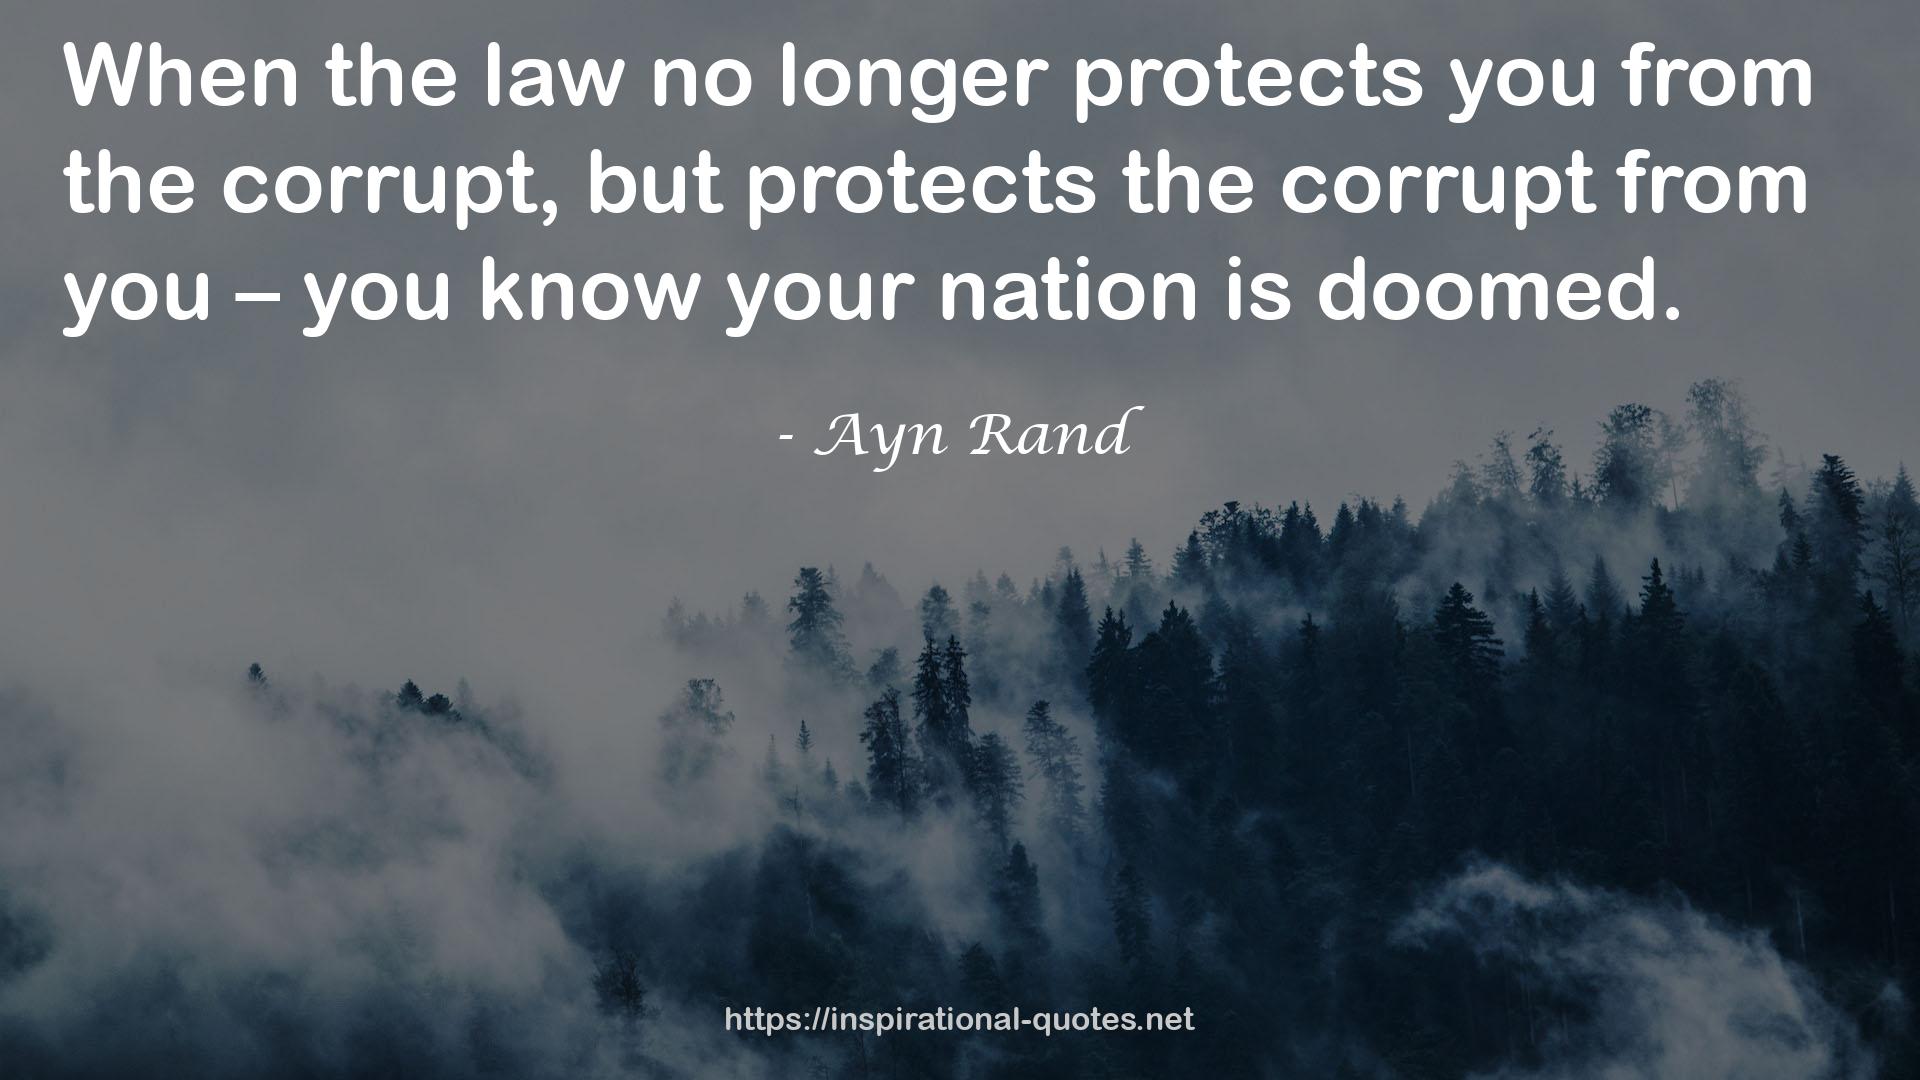 Ayn Rand QUOTES